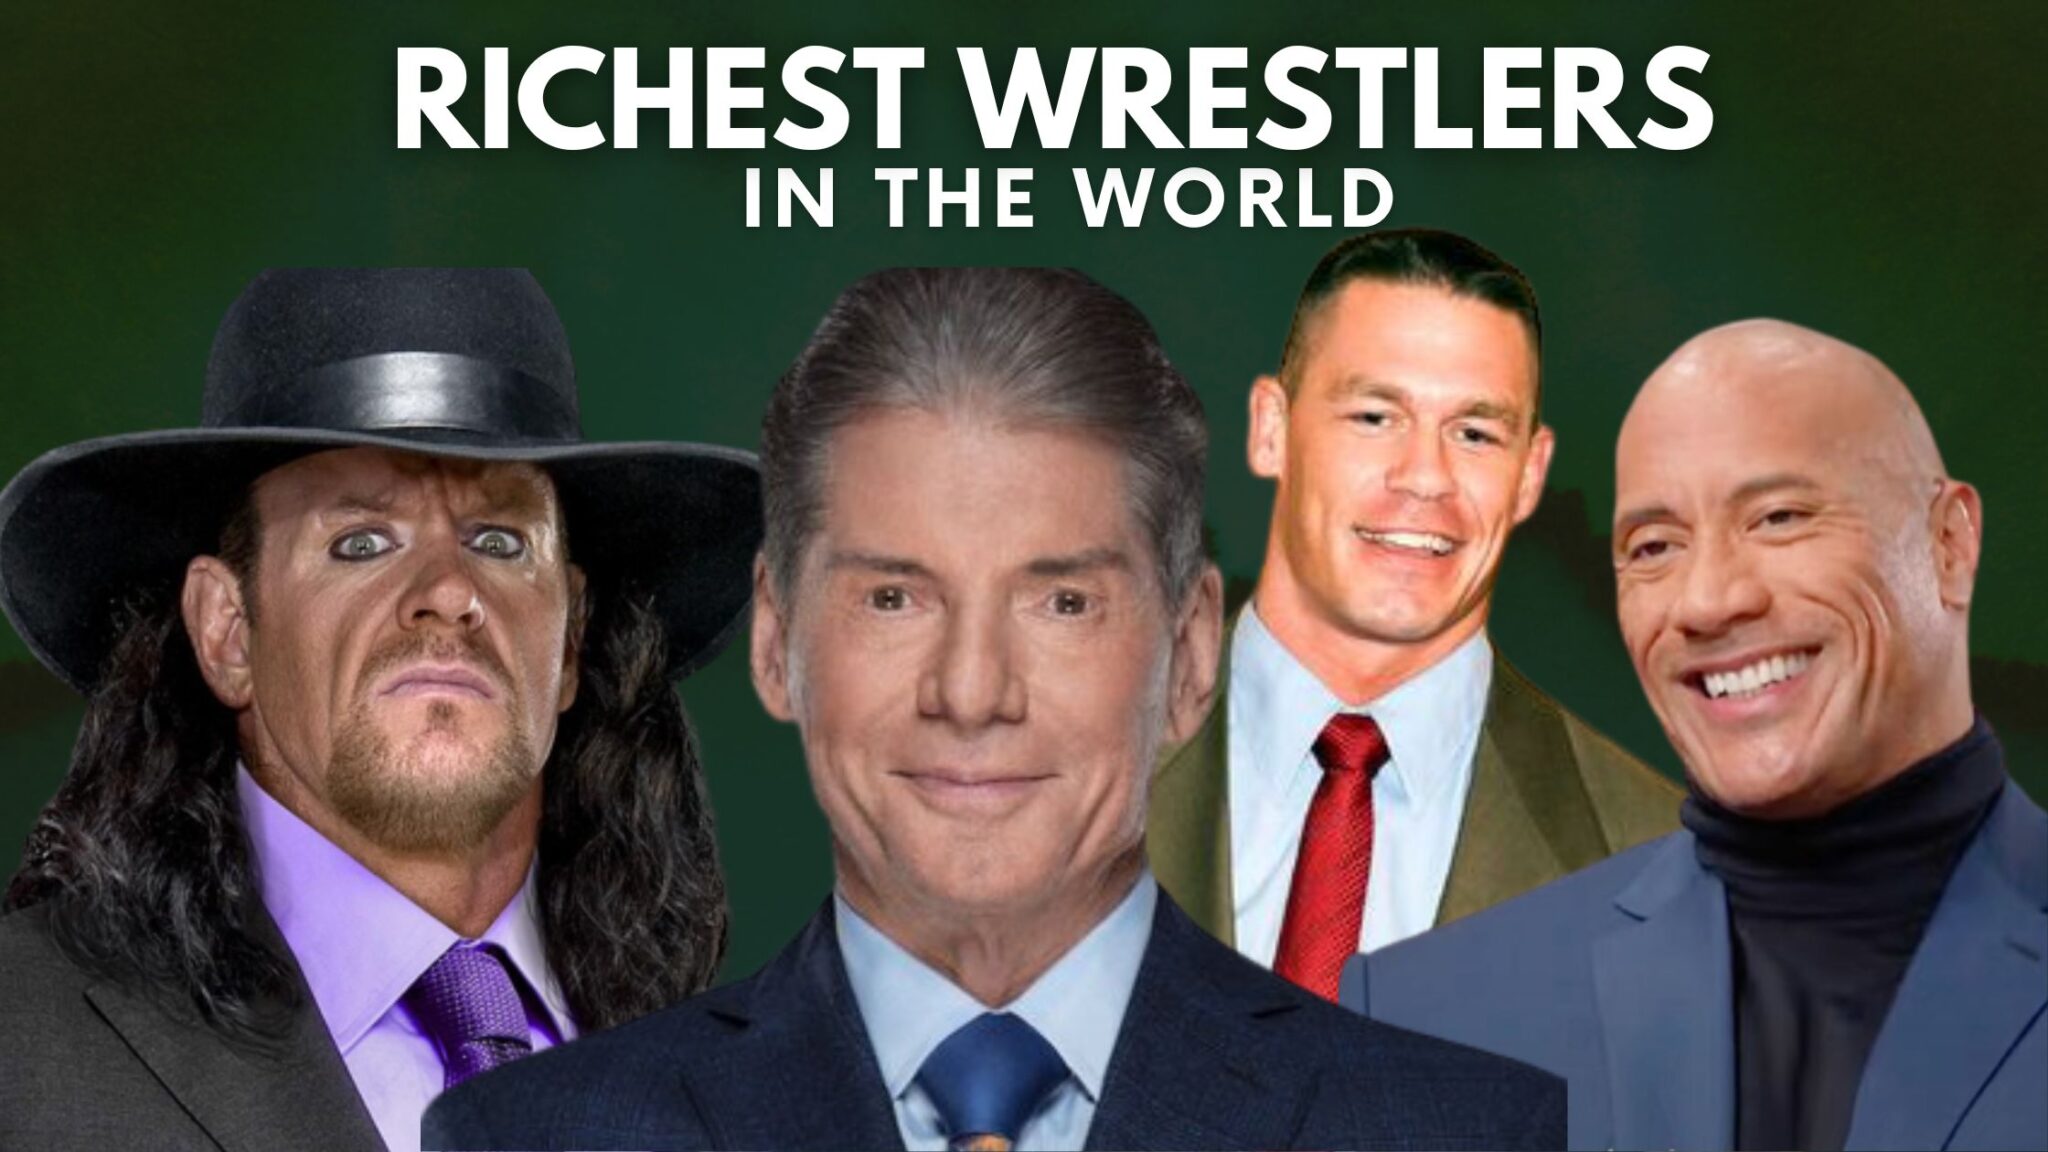 Top 10 Richest Wrestlers In The World (2022)